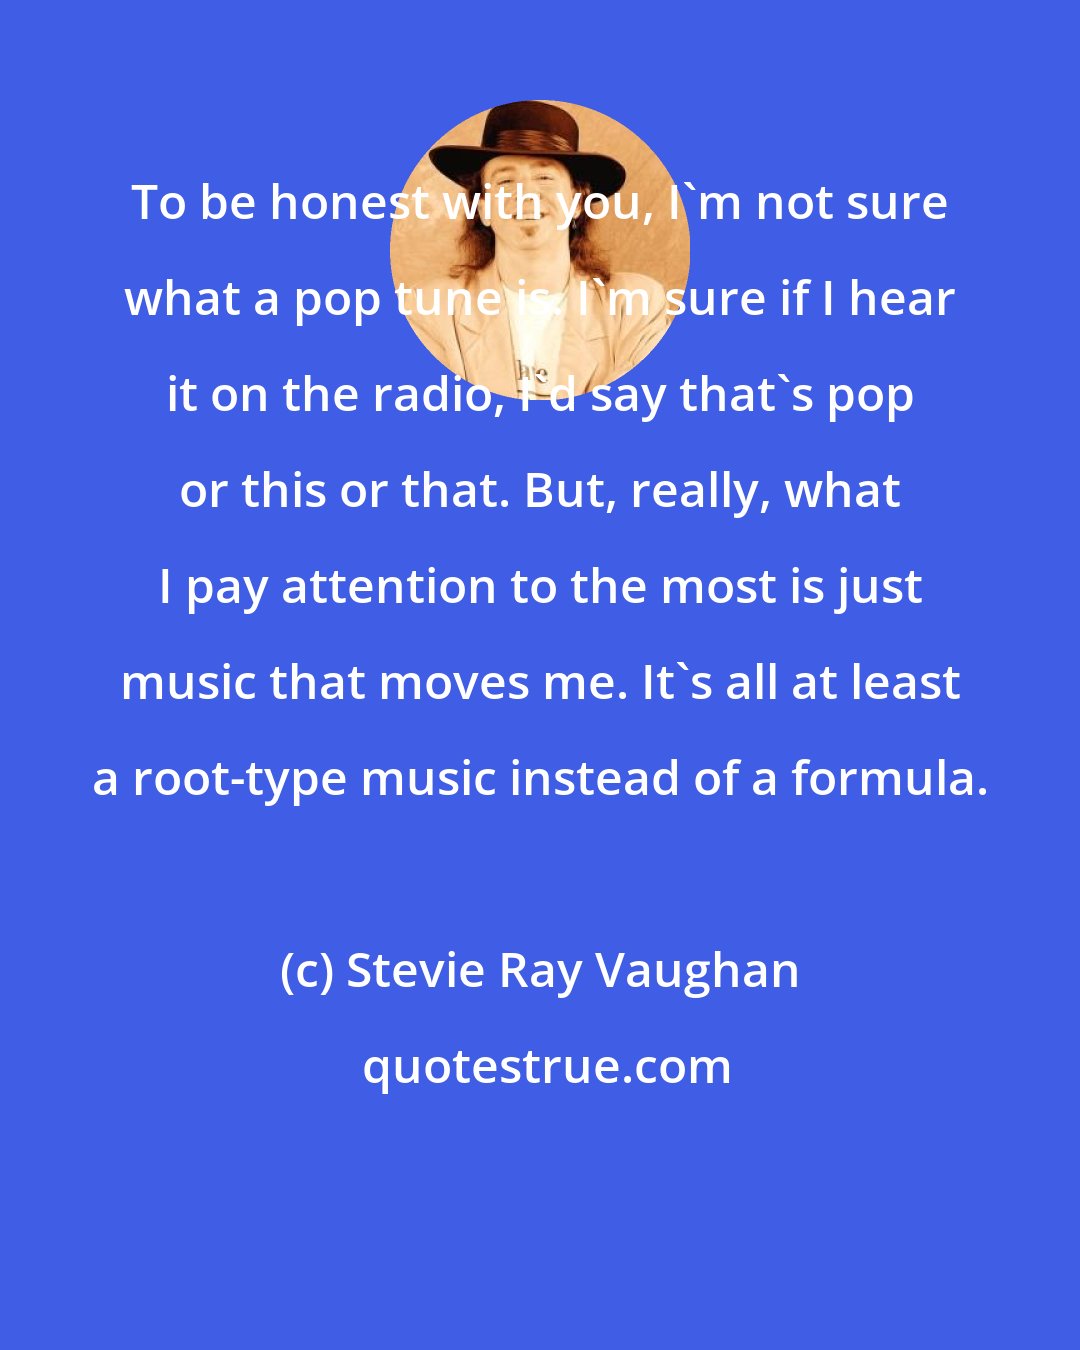 Stevie Ray Vaughan: To be honest with you, I'm not sure what a pop tune is. I'm sure if I hear it on the radio, I'd say that's pop or this or that. But, really, what I pay attention to the most is just music that moves me. It's all at least a root-type music instead of a formula.